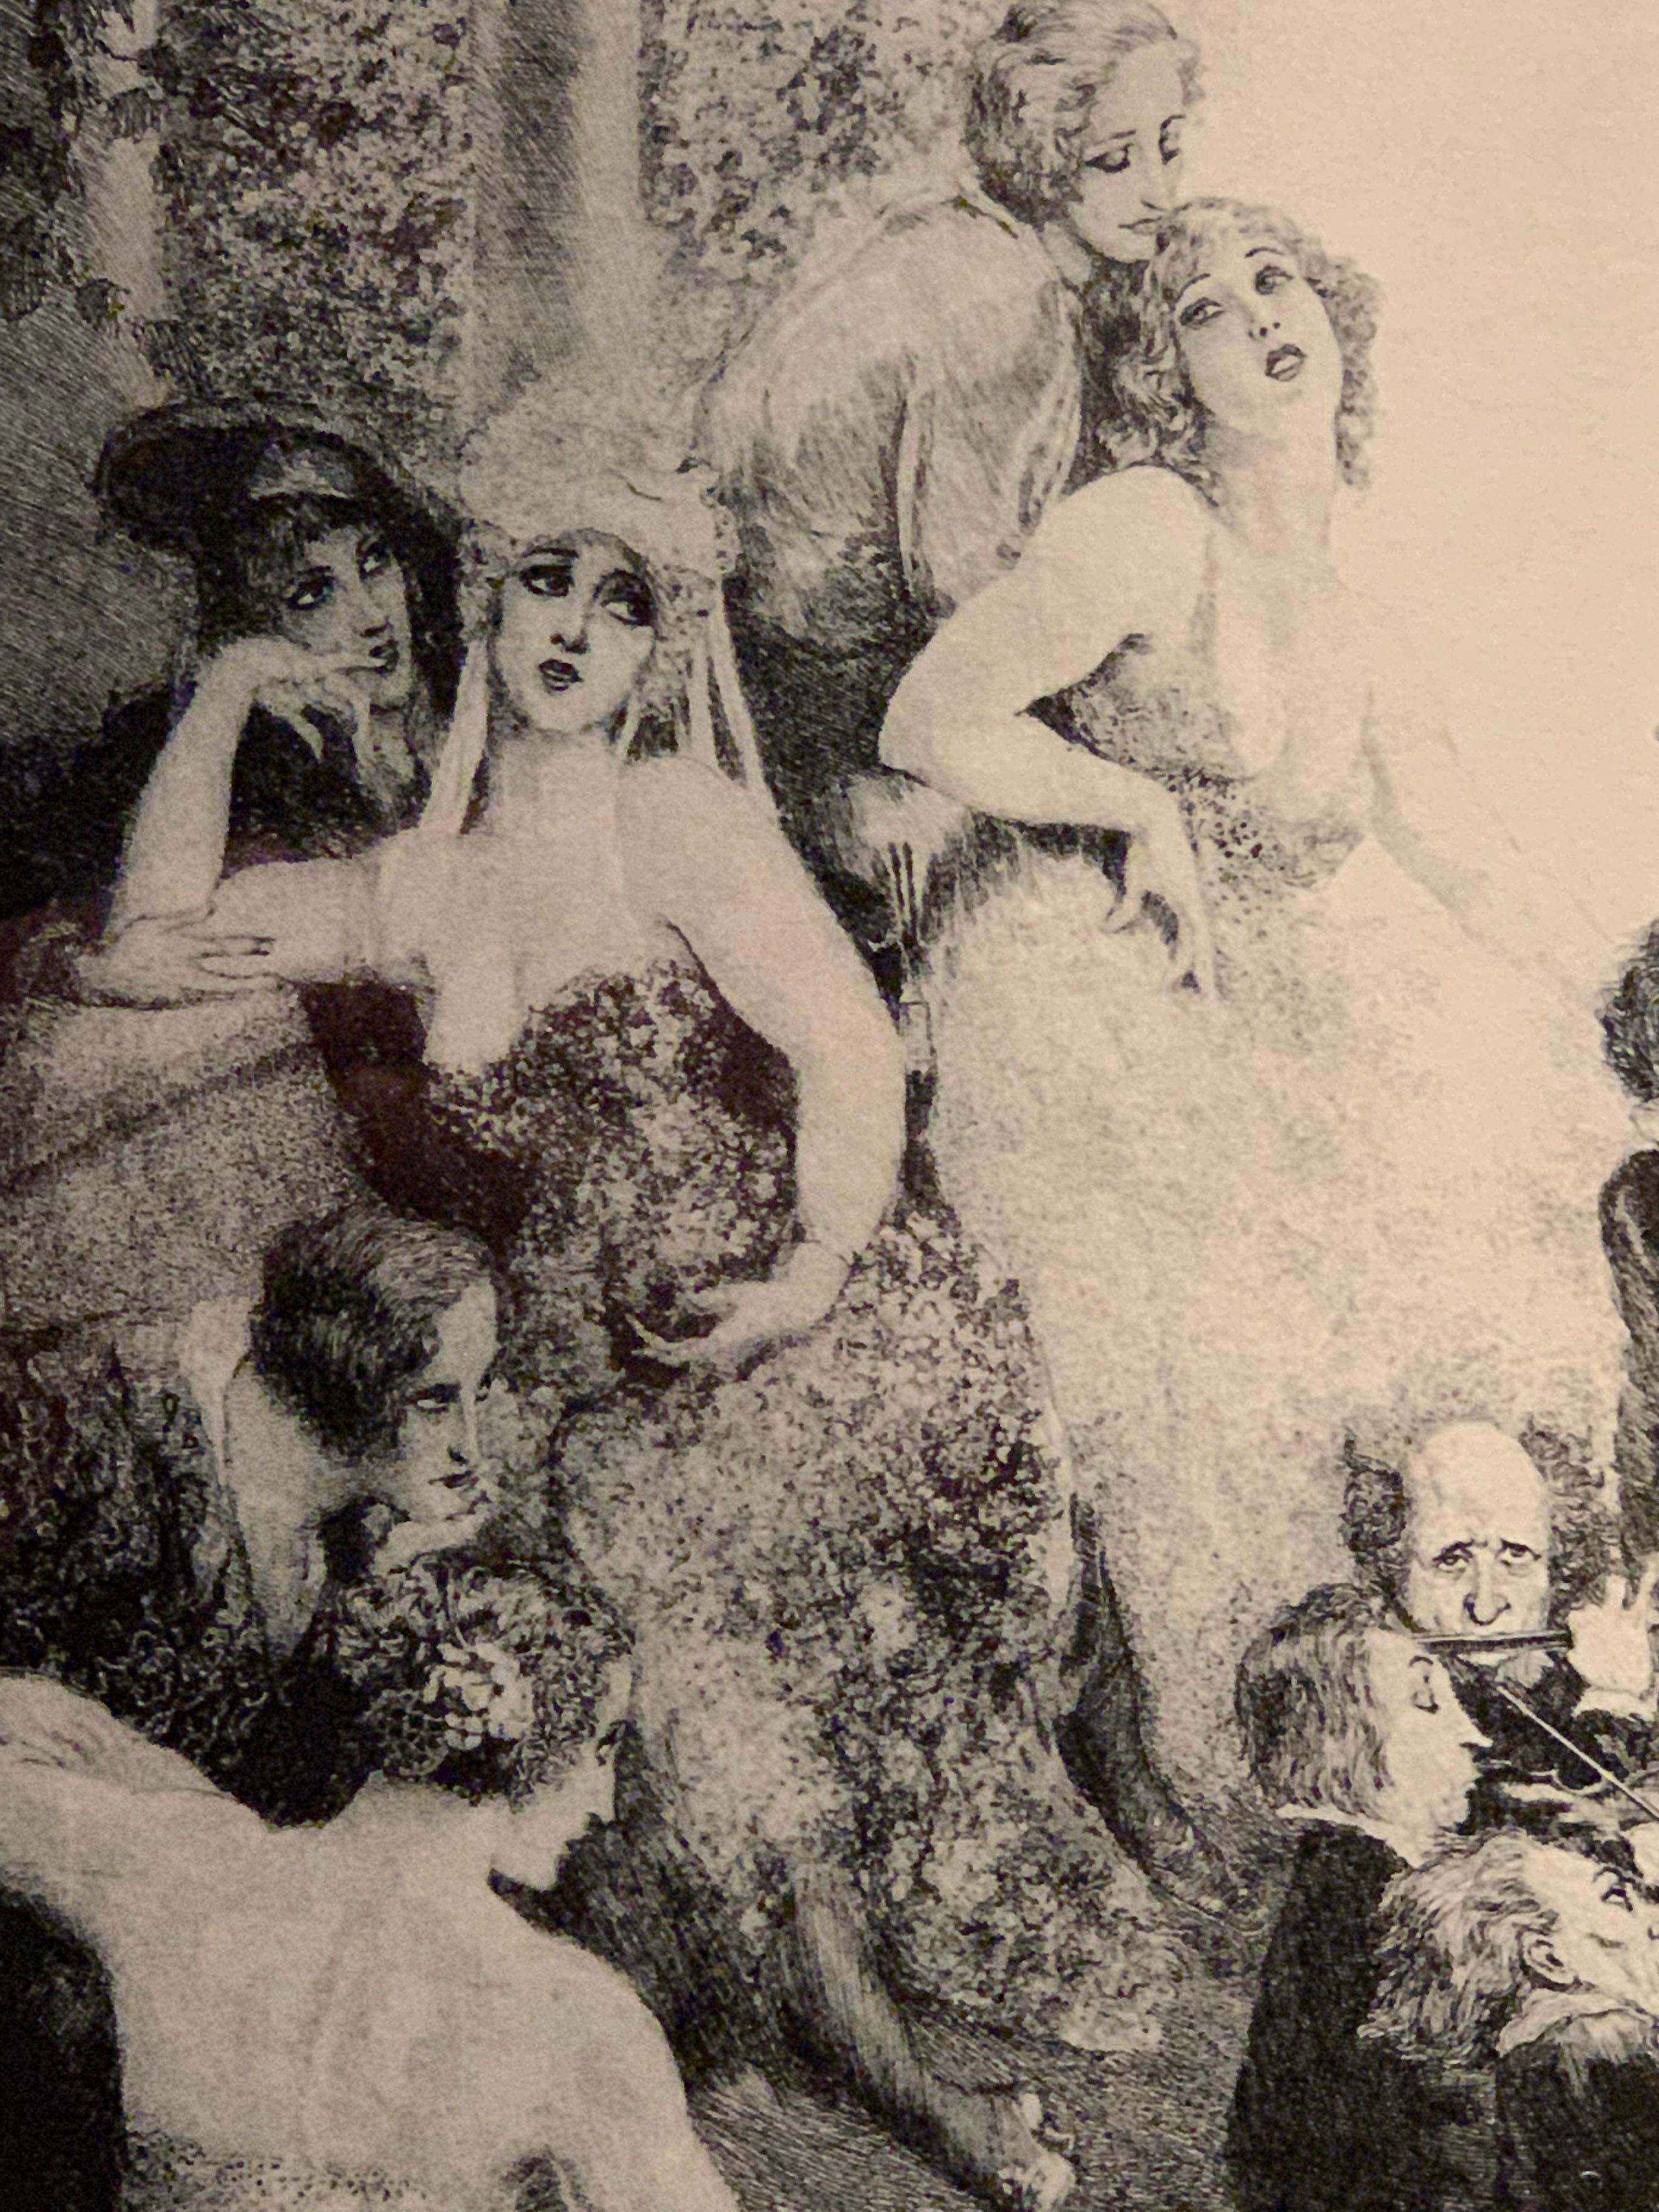 Summer Day Adante
By Norman Lindsay (Australian), (February 22, 1879 – November 21, 1969)
Etchings on Paper, Framed
image:
Width:  41cm (16inch)
Length: 37cm (14.5inch)
Glassed Frame:
Width: 69cm (27inch)
Length: 67.5cm (26.5inch)


Widely regarded